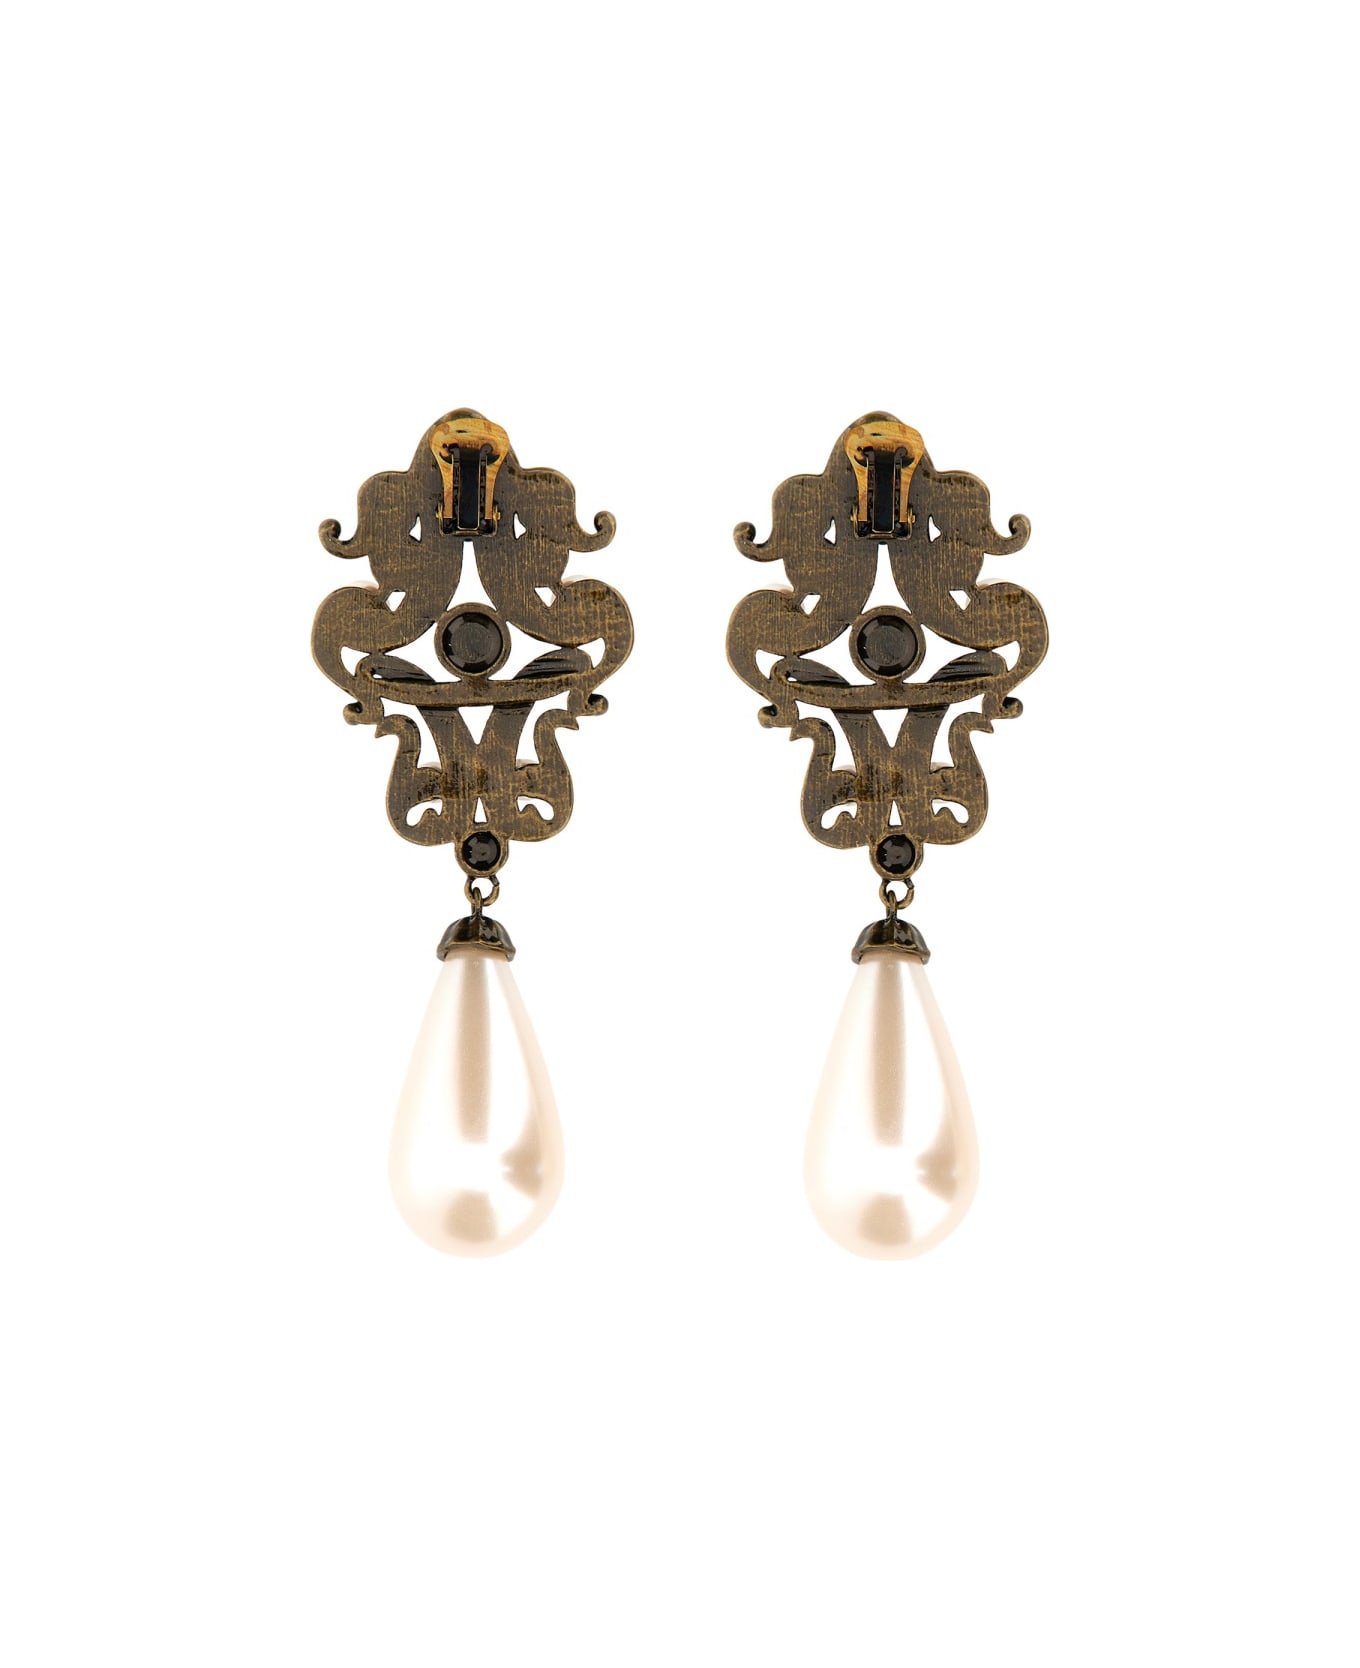 Moschino Gold Heart Clip Earrings - GOLD イヤリング